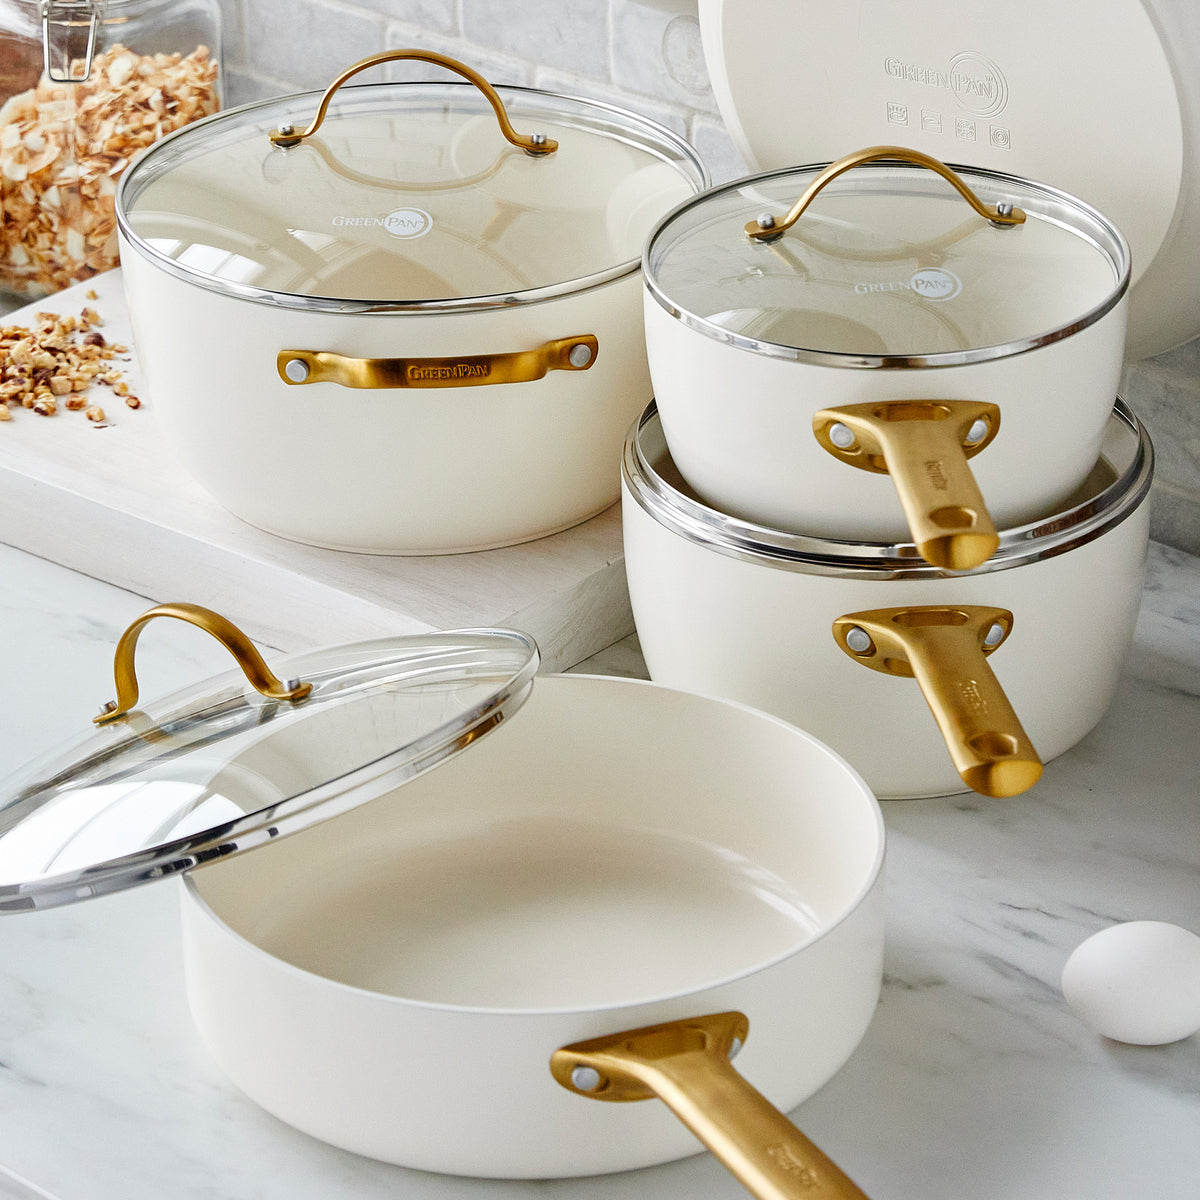 Reserve Ceramic Nonstick 10-Piece Cookware Set, Julep with Gold-Tone